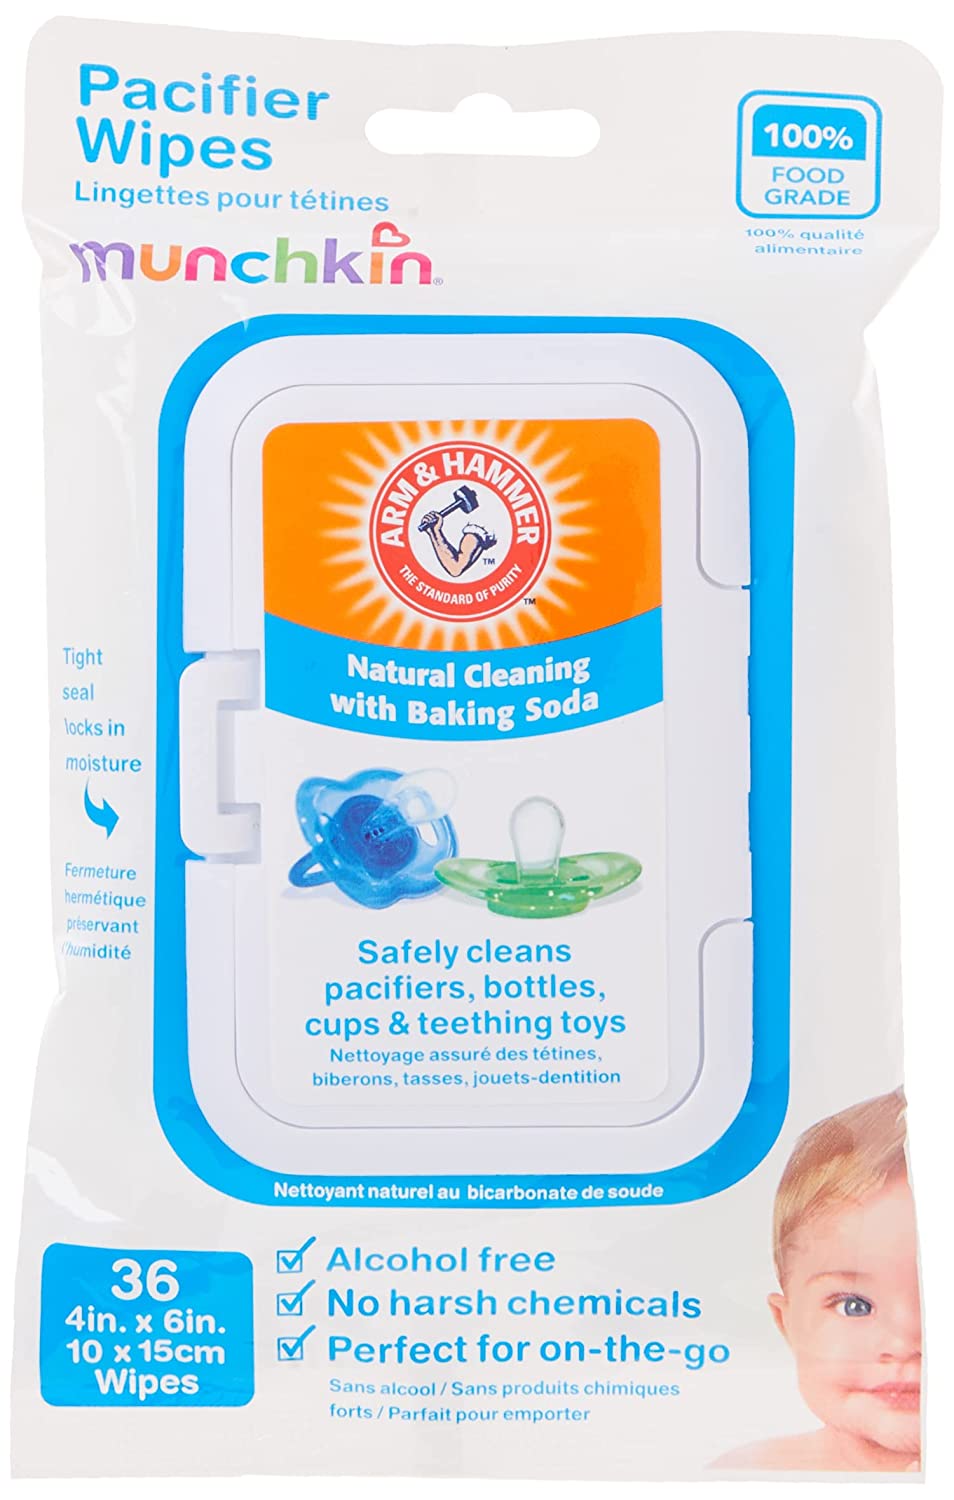 Pacifier Wipes - 36pk